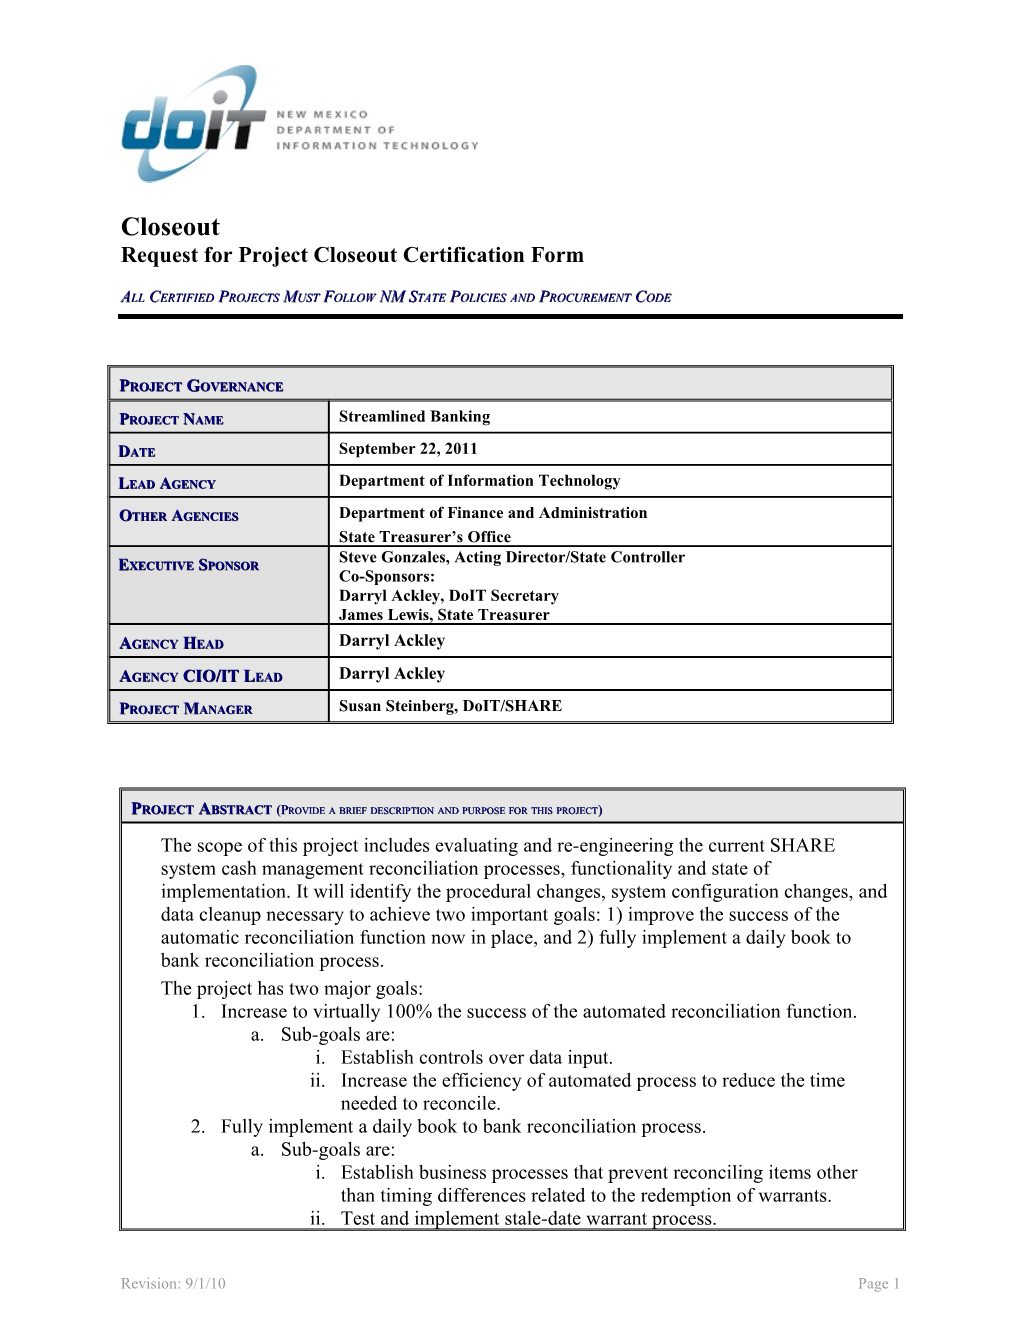 Request for Project Closeout Certification Form